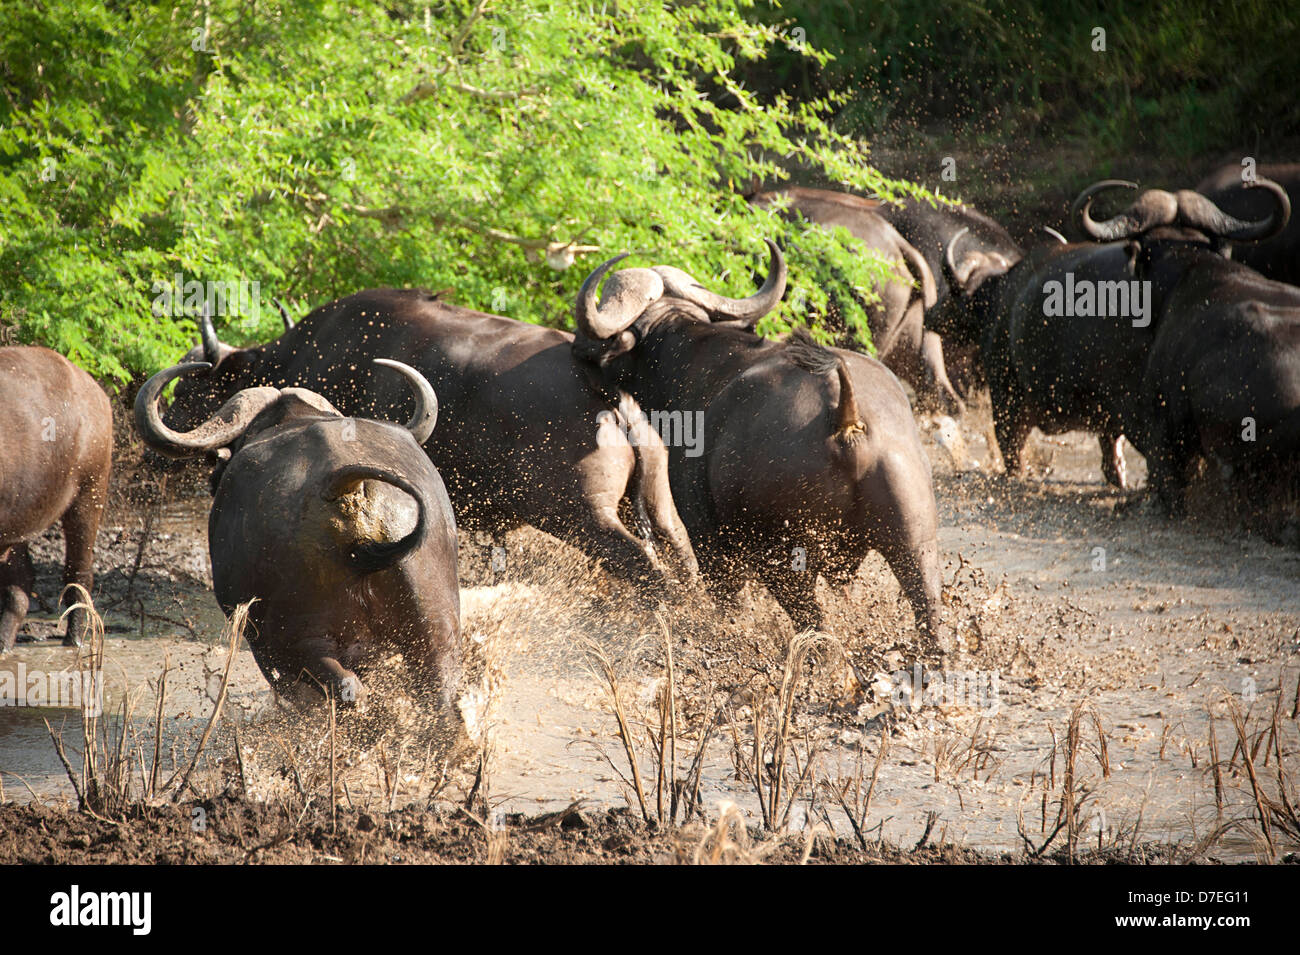 African buffaloes in muddy water in Thanda Game Reserve, South Africa. Stock Photo